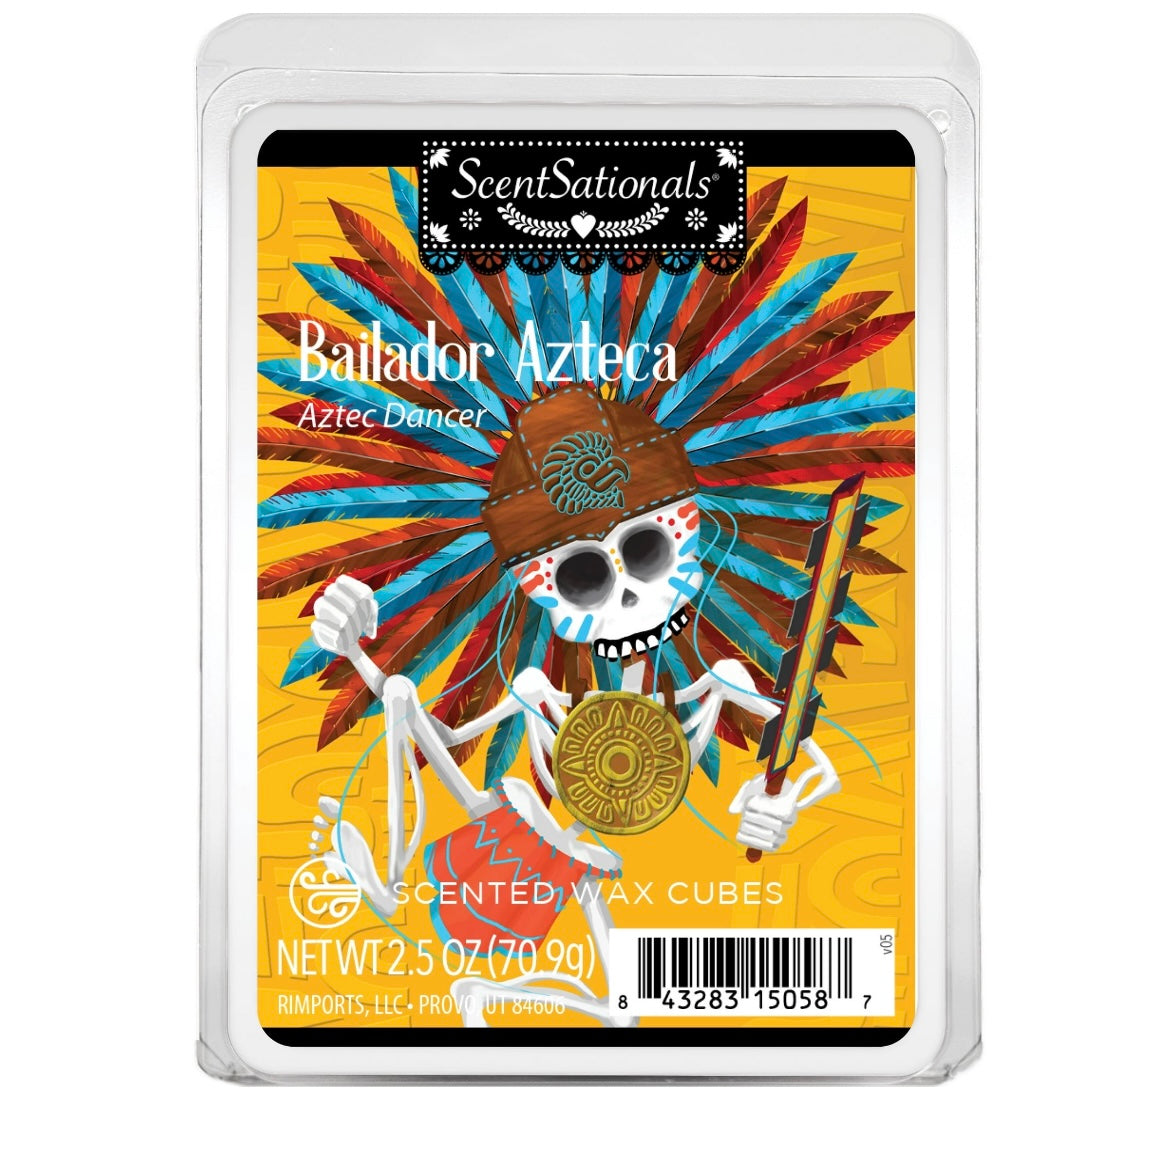 ScentSationals Scented Wax Melts (Halloween Edition)